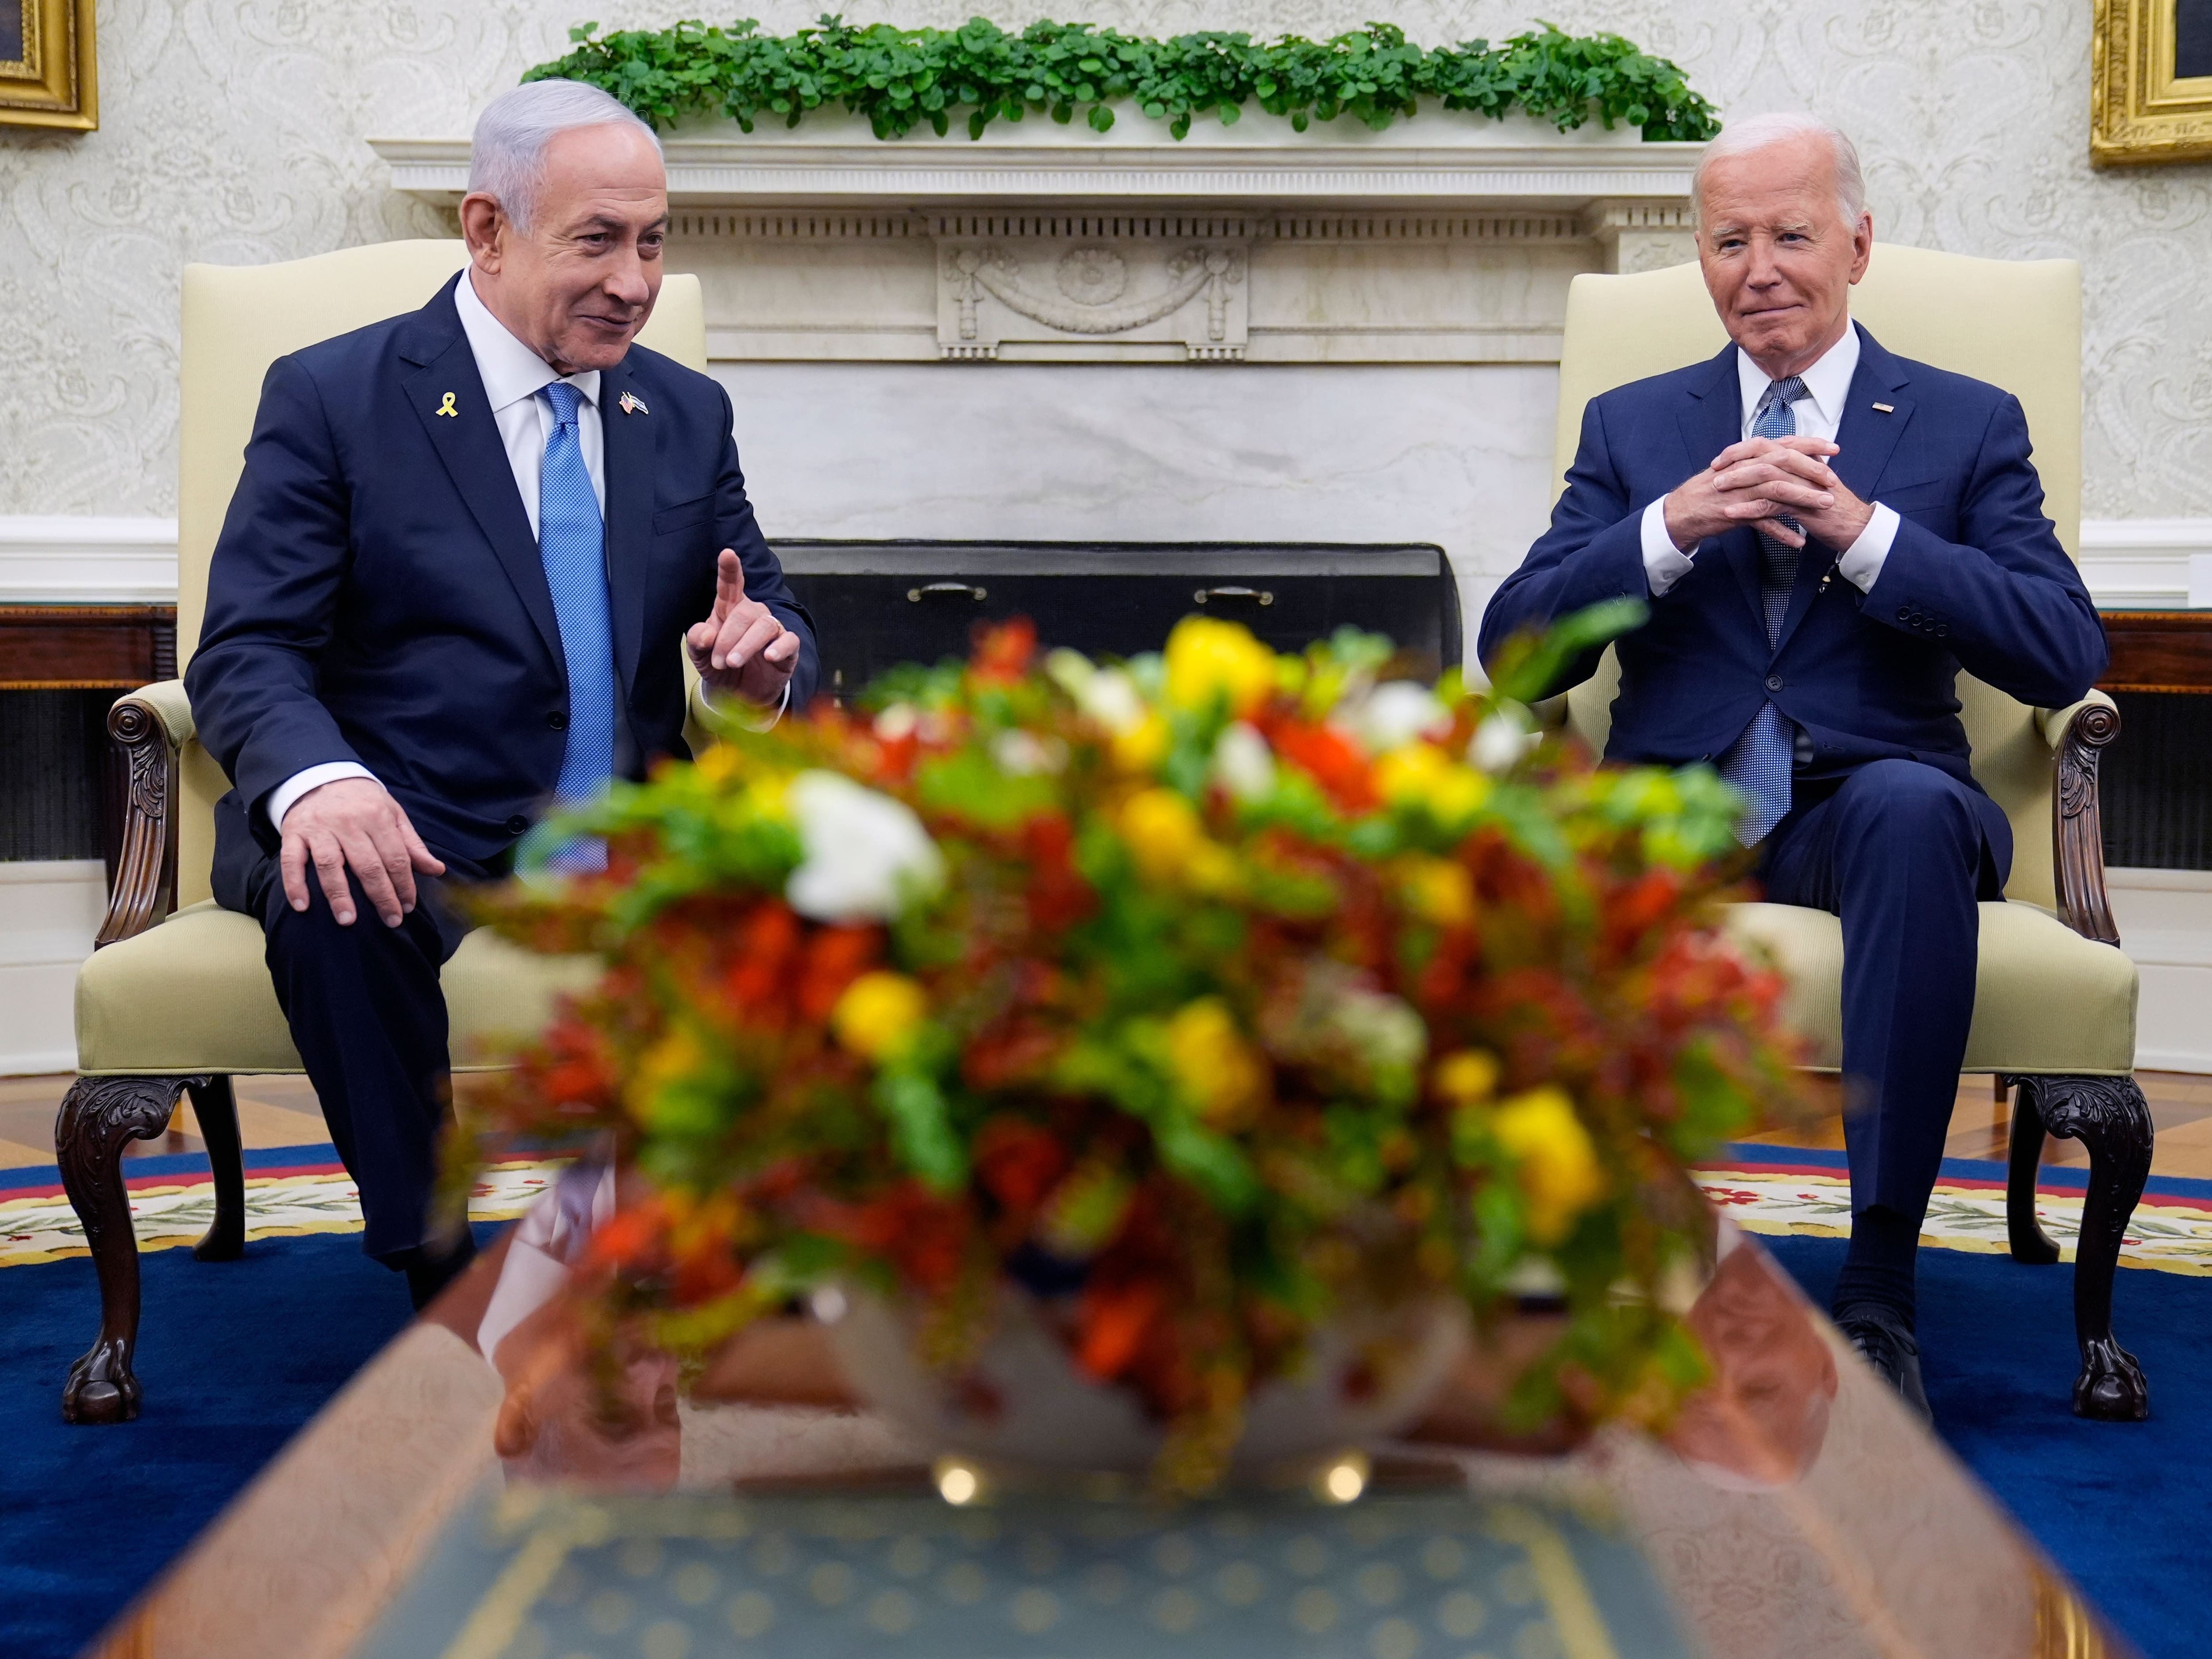 Netanyahu meets with Biden and Harris at crucial moment for the US and Israel